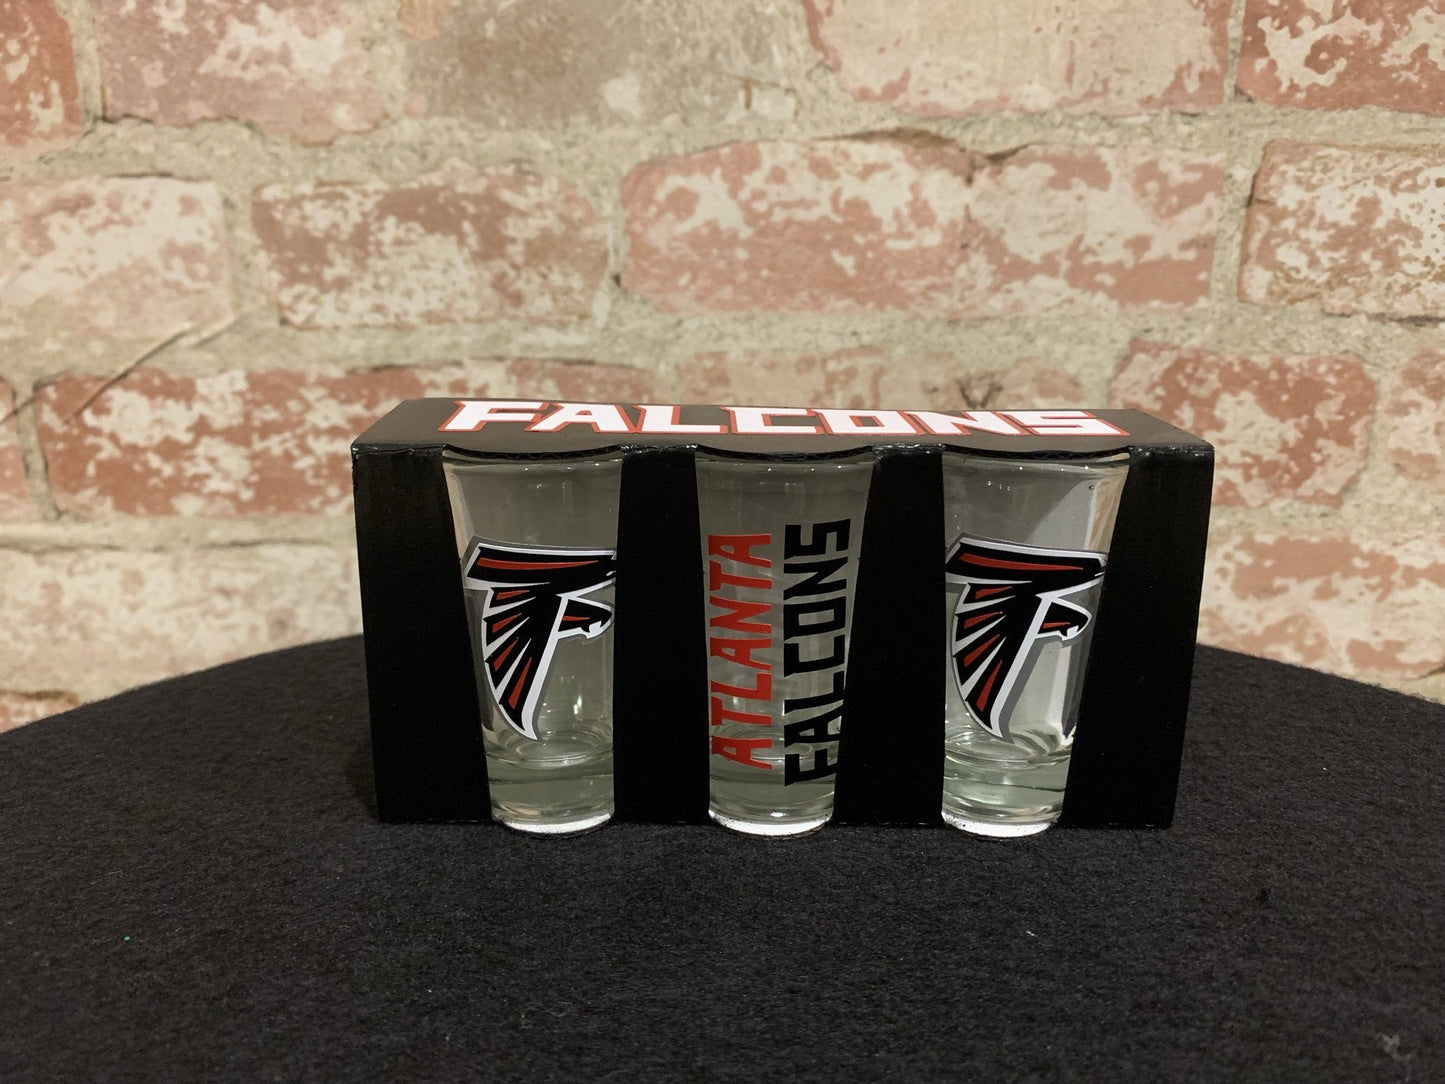 Sports Themed Shot Glass Set, 3-Piece Set Inspired by Football, Football Gift Set Drinkware B1ack By Design LLC 